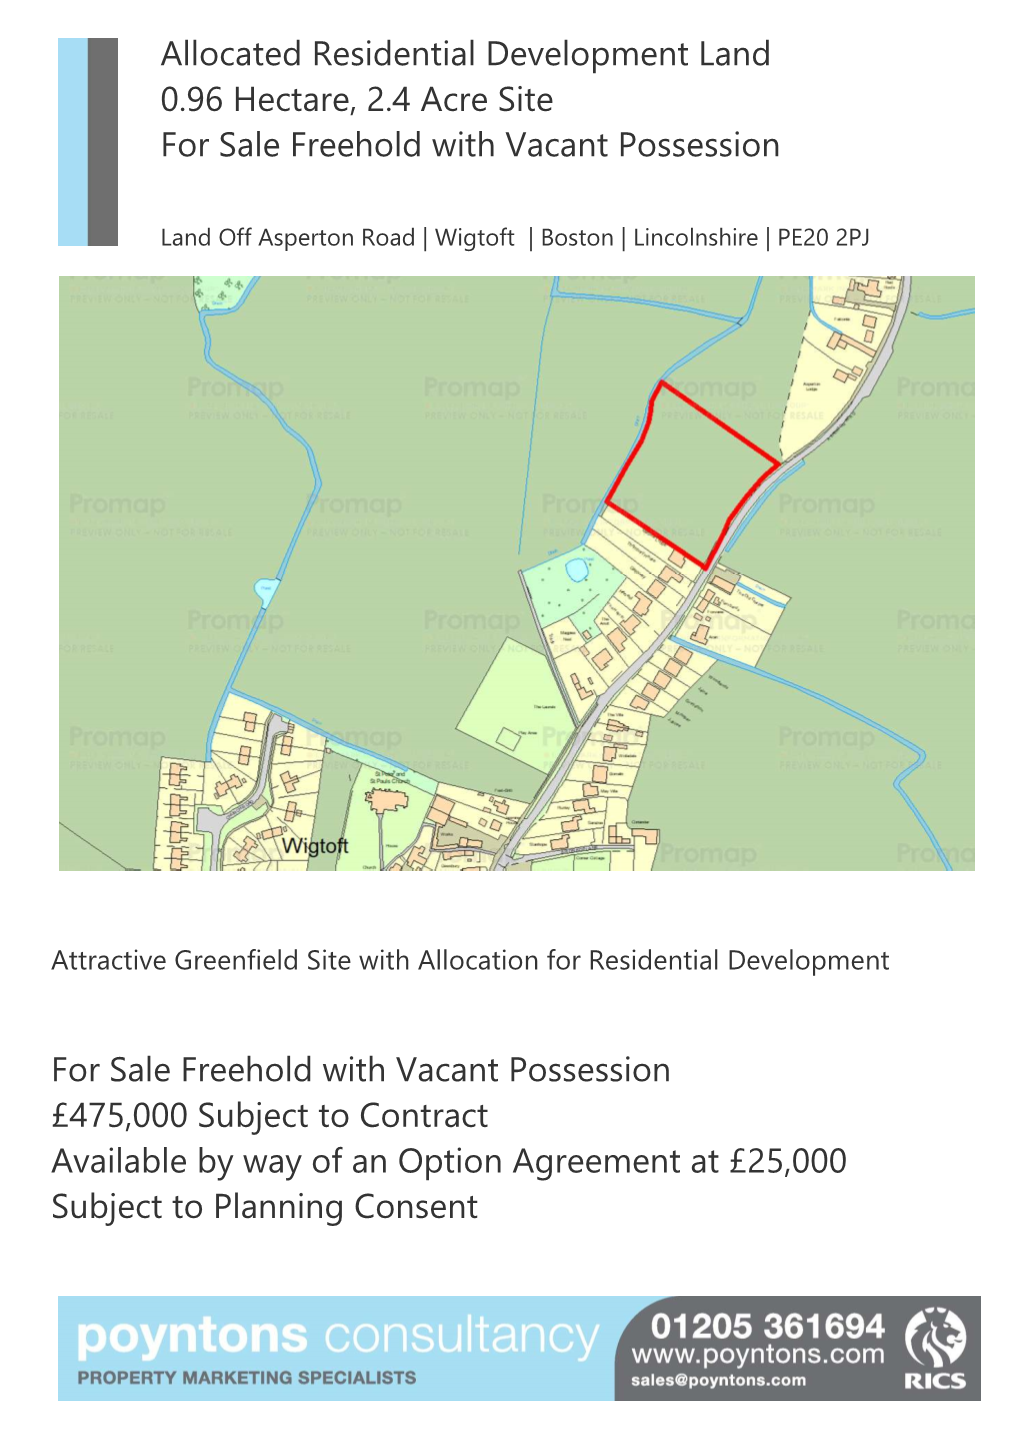 Allocated Residential Development Land 0.96 Hectare, 2.4 Acre Site for Sale Freehold with Vacant Possession